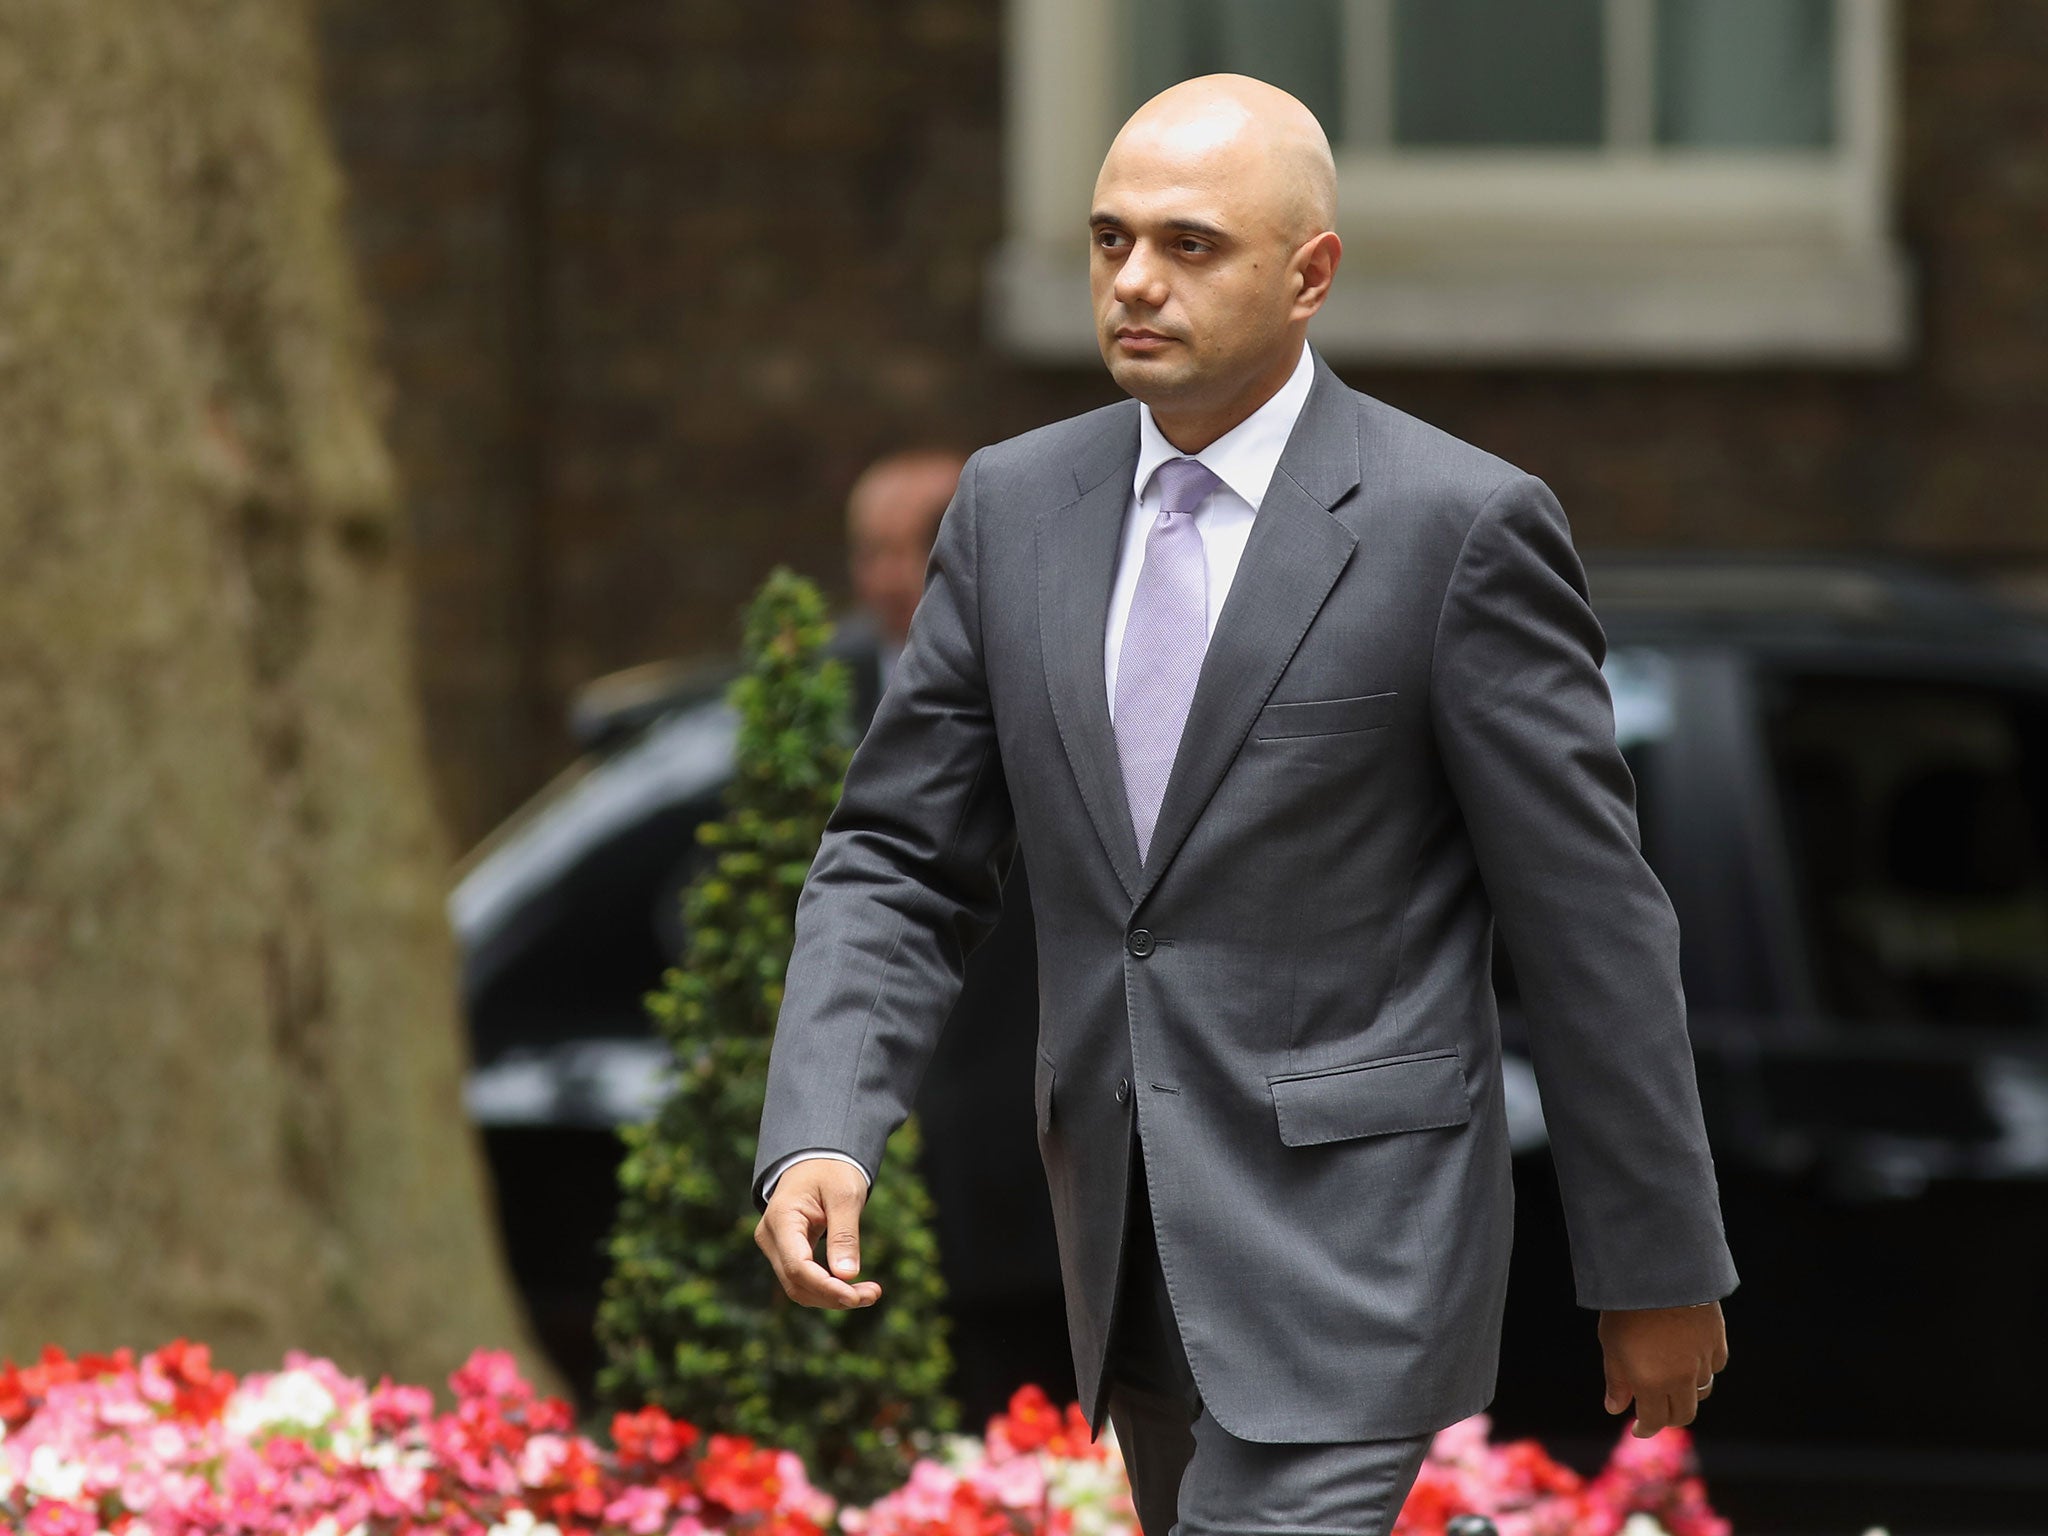 Communities Secretary Sajid Javid said council tax bills would rise by £1 a month to pay for adult social care